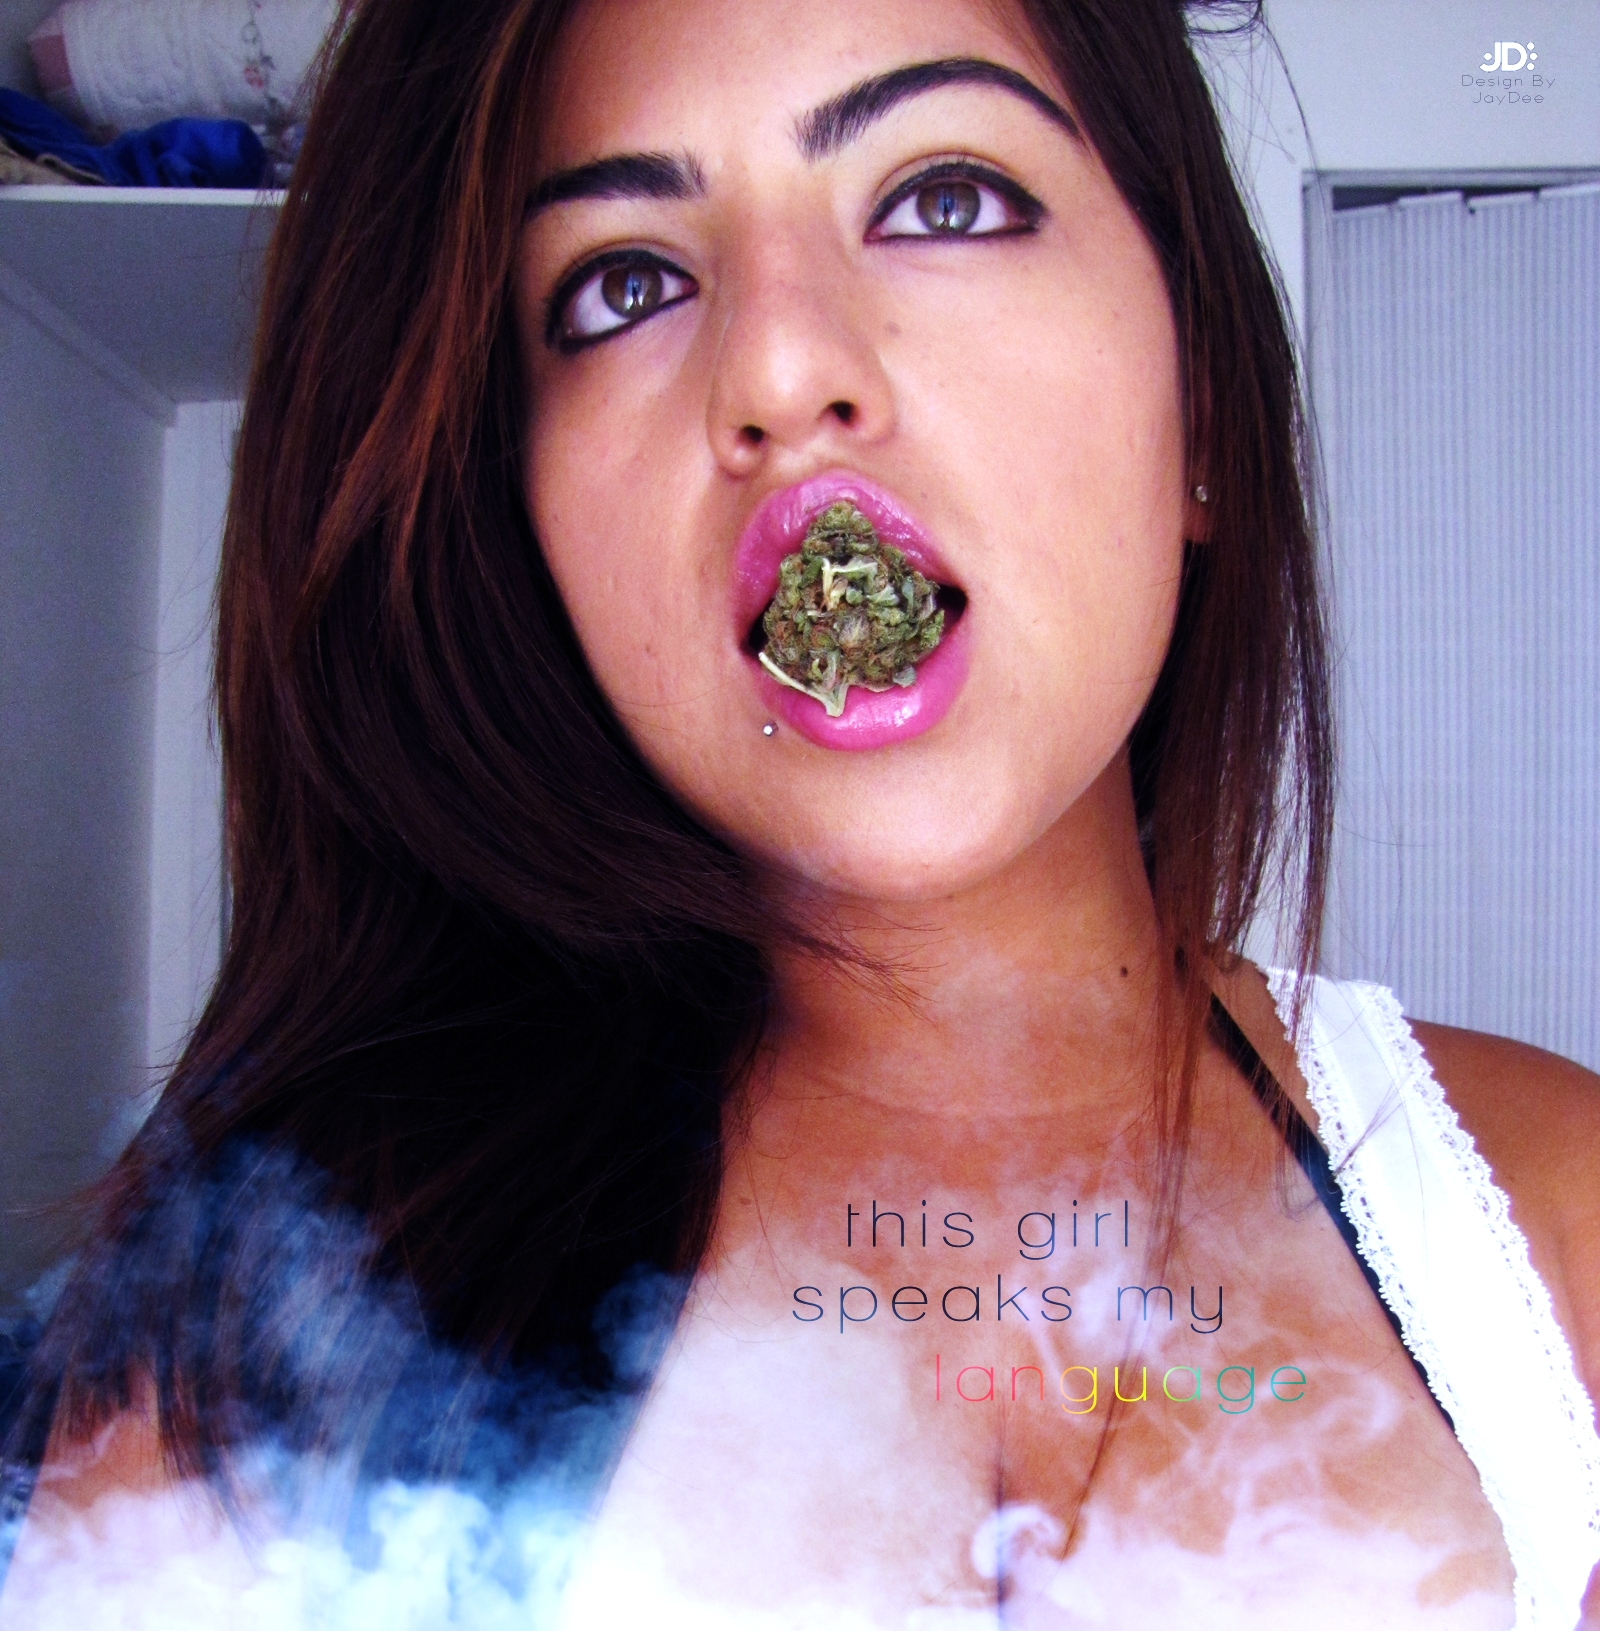 Weed and girls